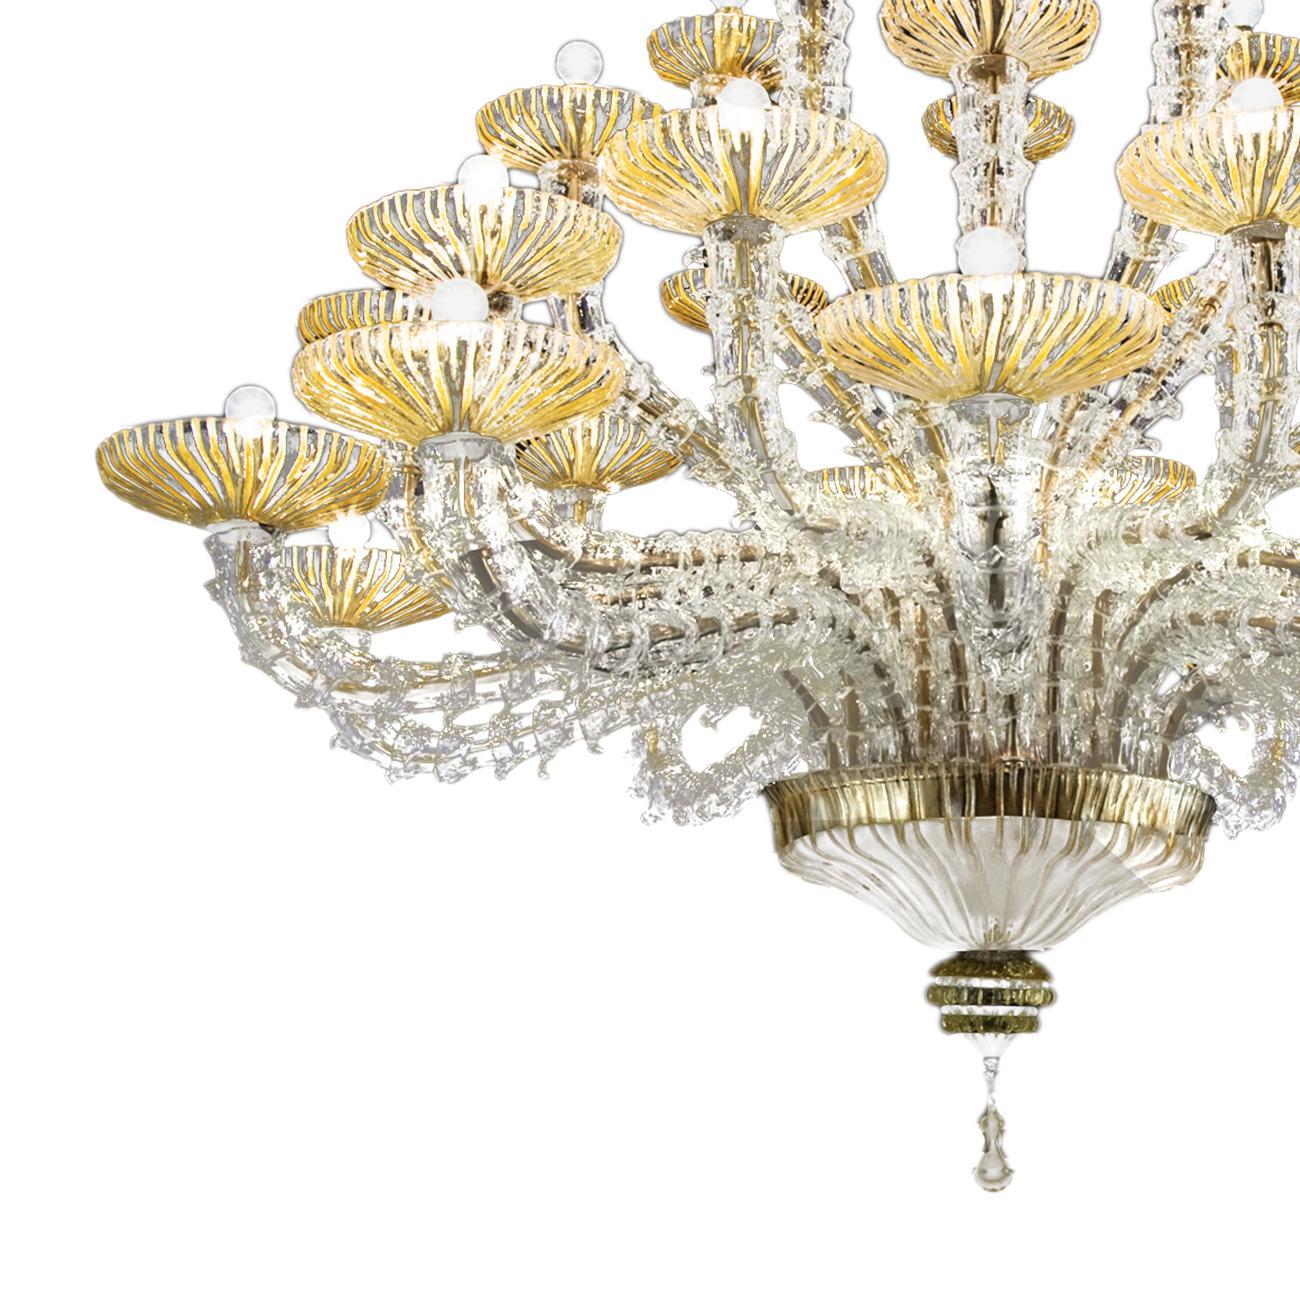 Artistic handmade Murano glass chandelier glamour by La Murrina, blowed in our furnace in Murano - Venice following the ancient glassmaster's art.

Additional information:
- Material: Murano glass
- Hardware finishing: Gold plated
- Dimensions: